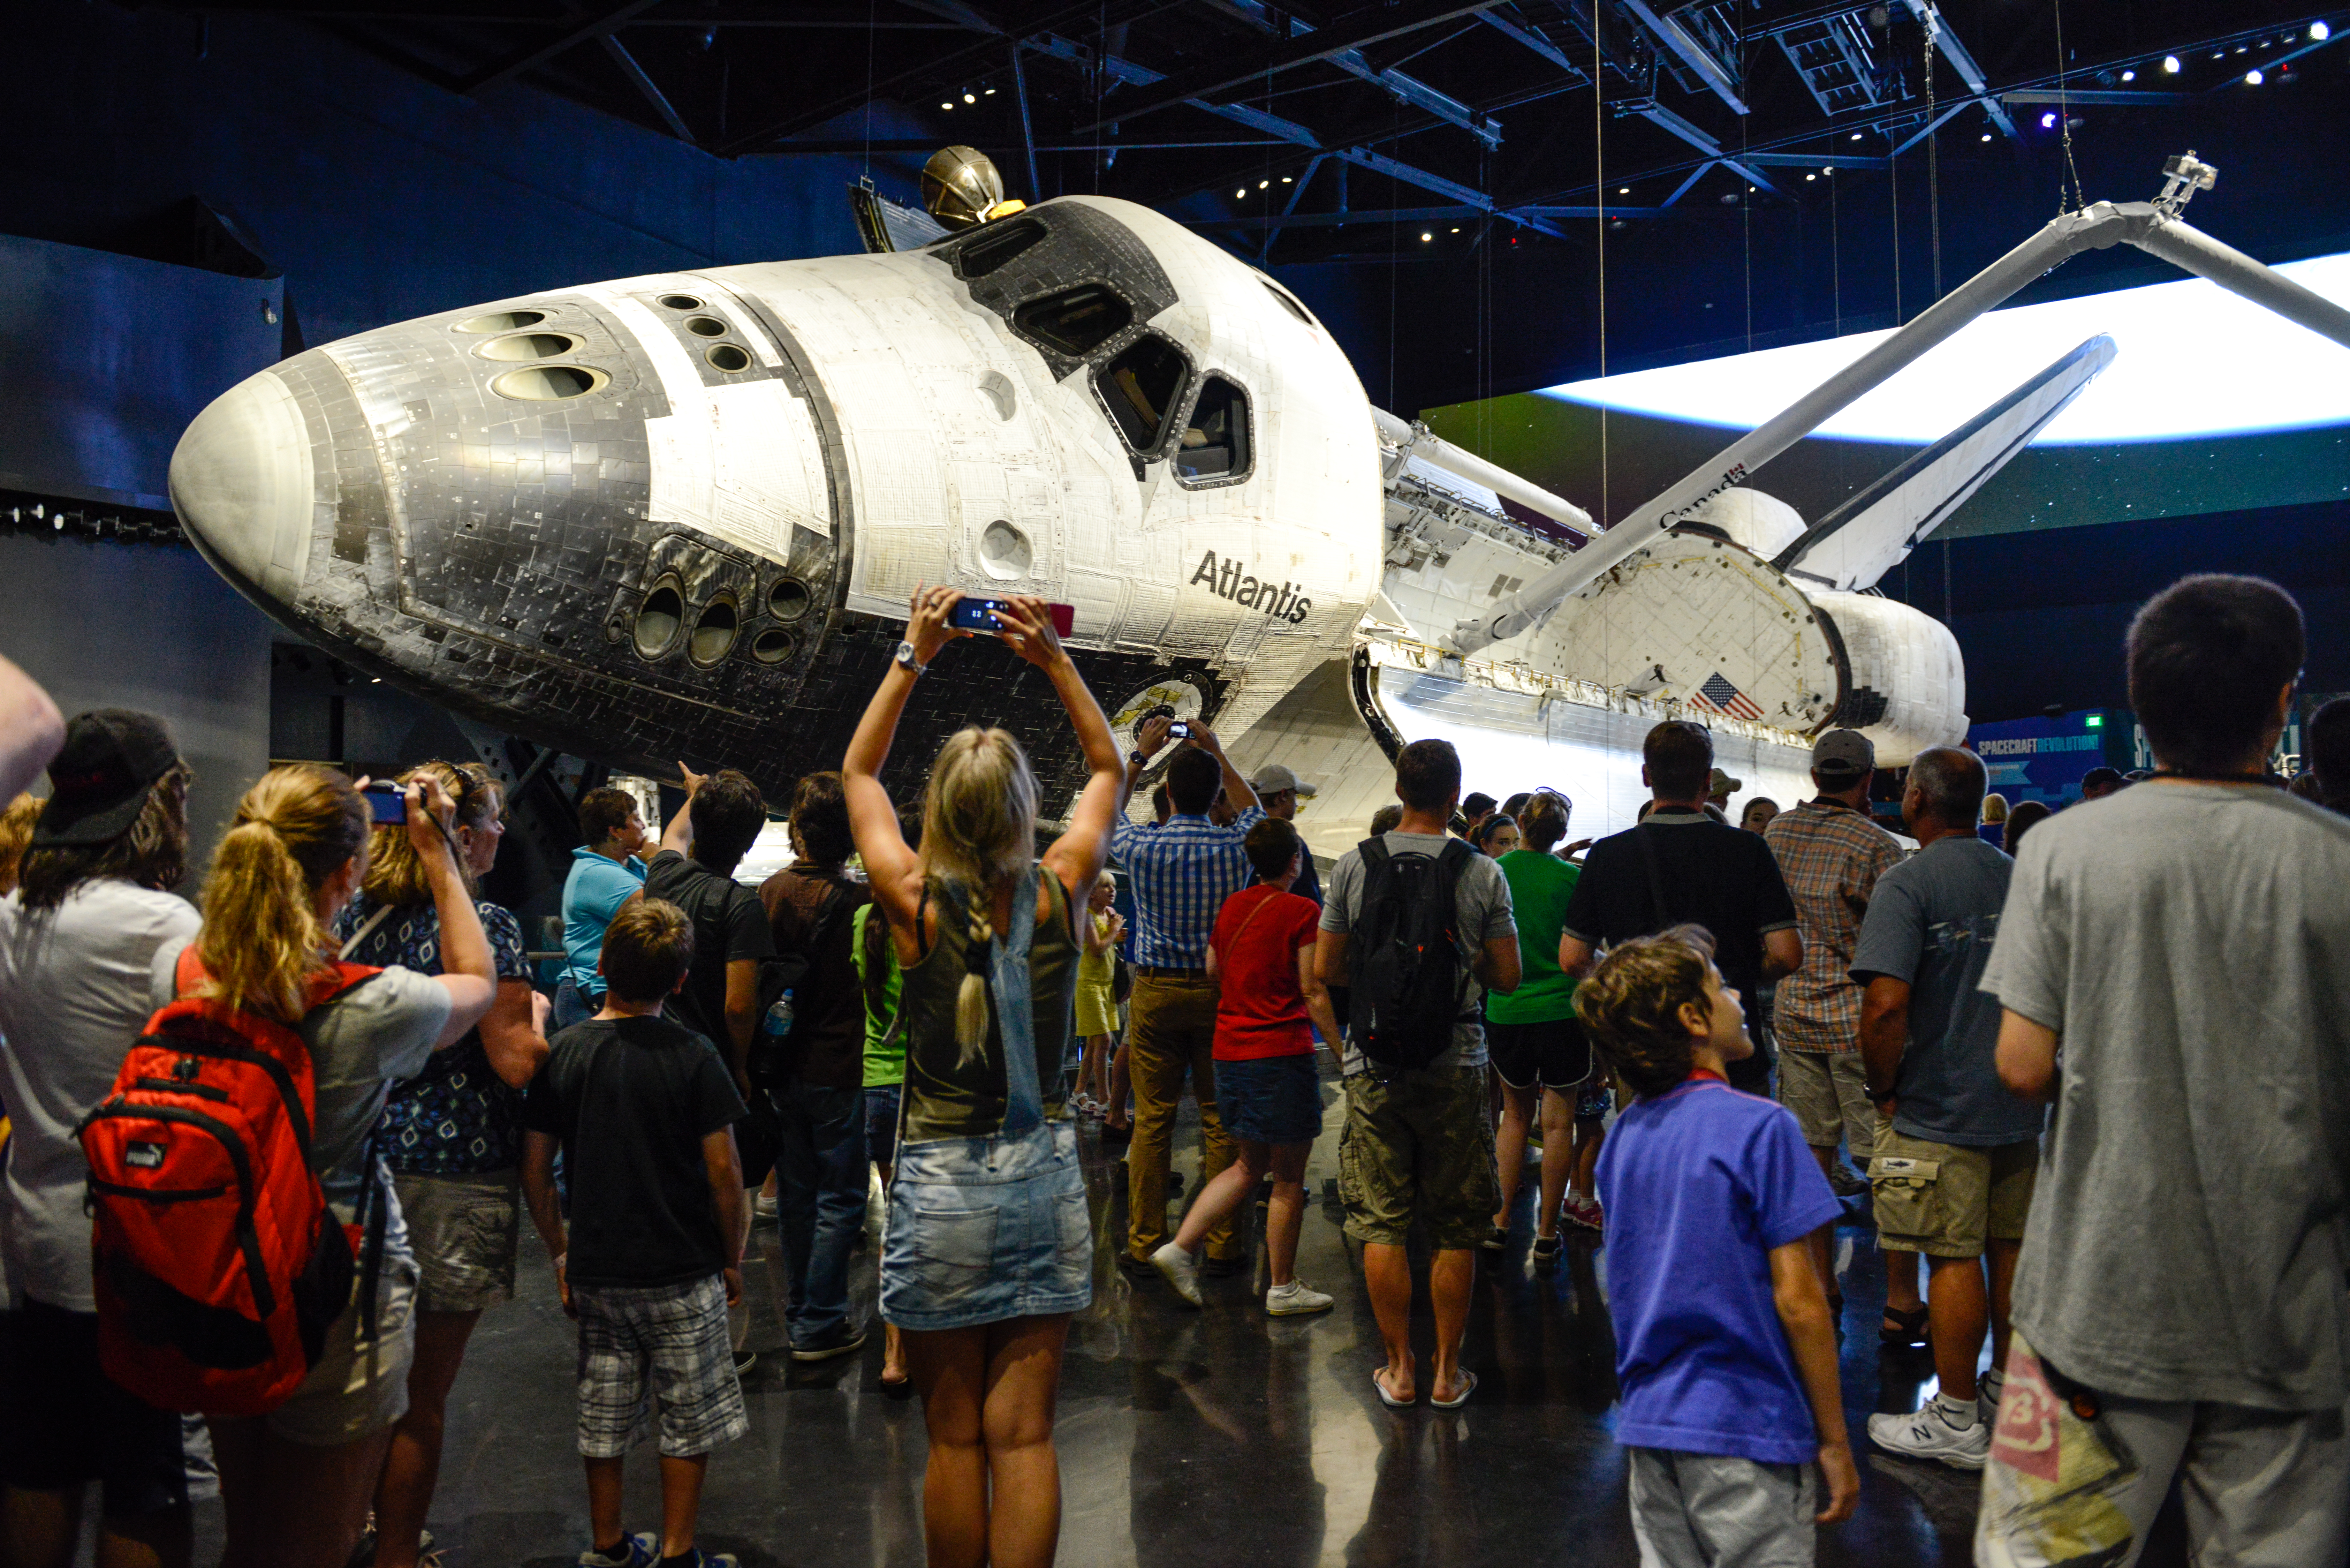 Atlantis at the Kennedy Space Center